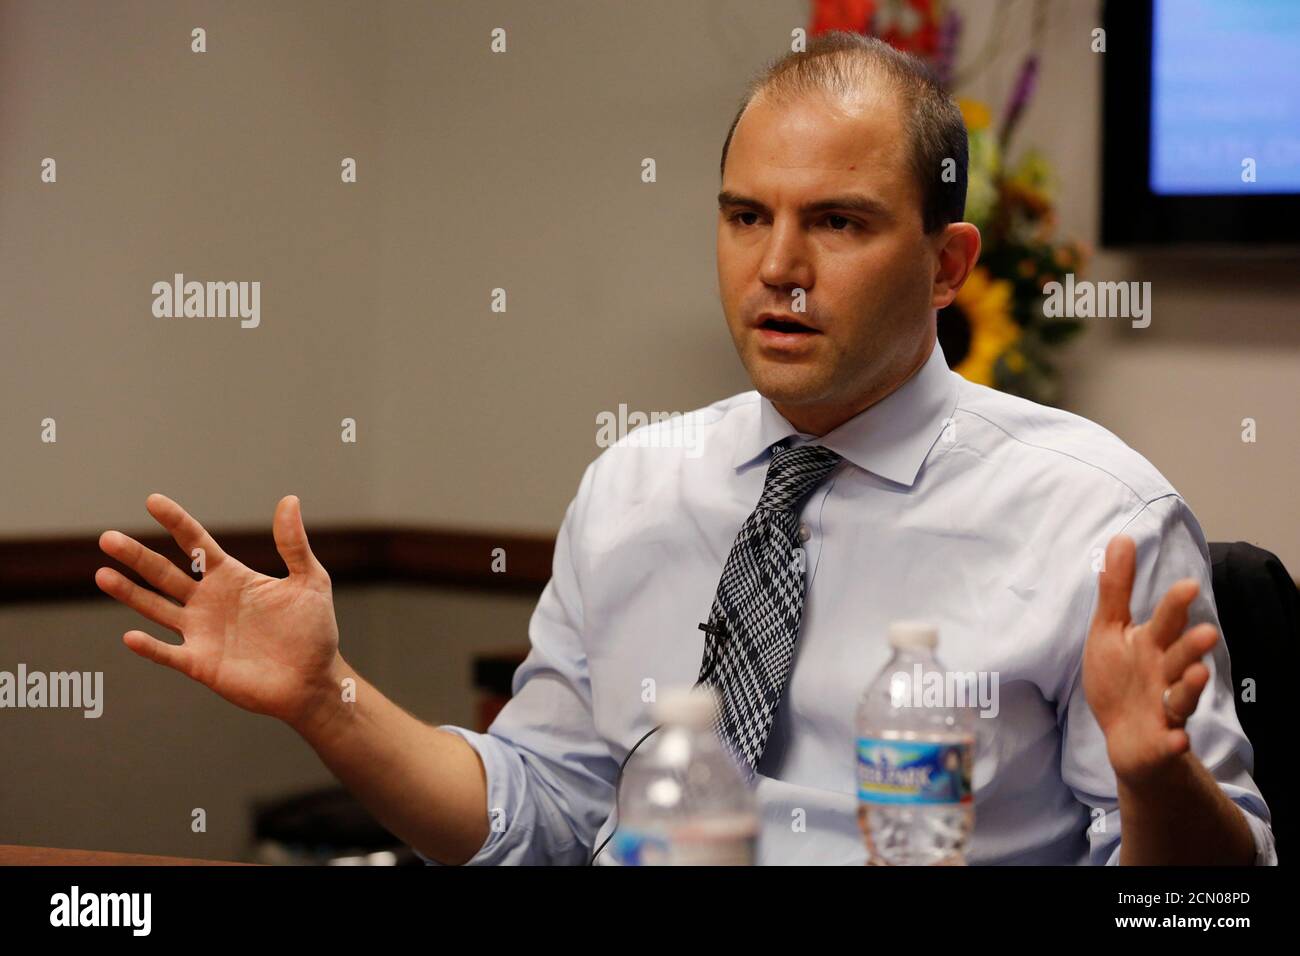 Ben Rhodes, assistant to the President and Deputy National Security Advisor for Strategic Communications at the White House, answers a question during the Reuters Washington Summit in Washington, October 24, 2013. REUTERS/Jim Bourg  (UNITED STATES - Tags: POLITICS BUSINESS) Stock Photo